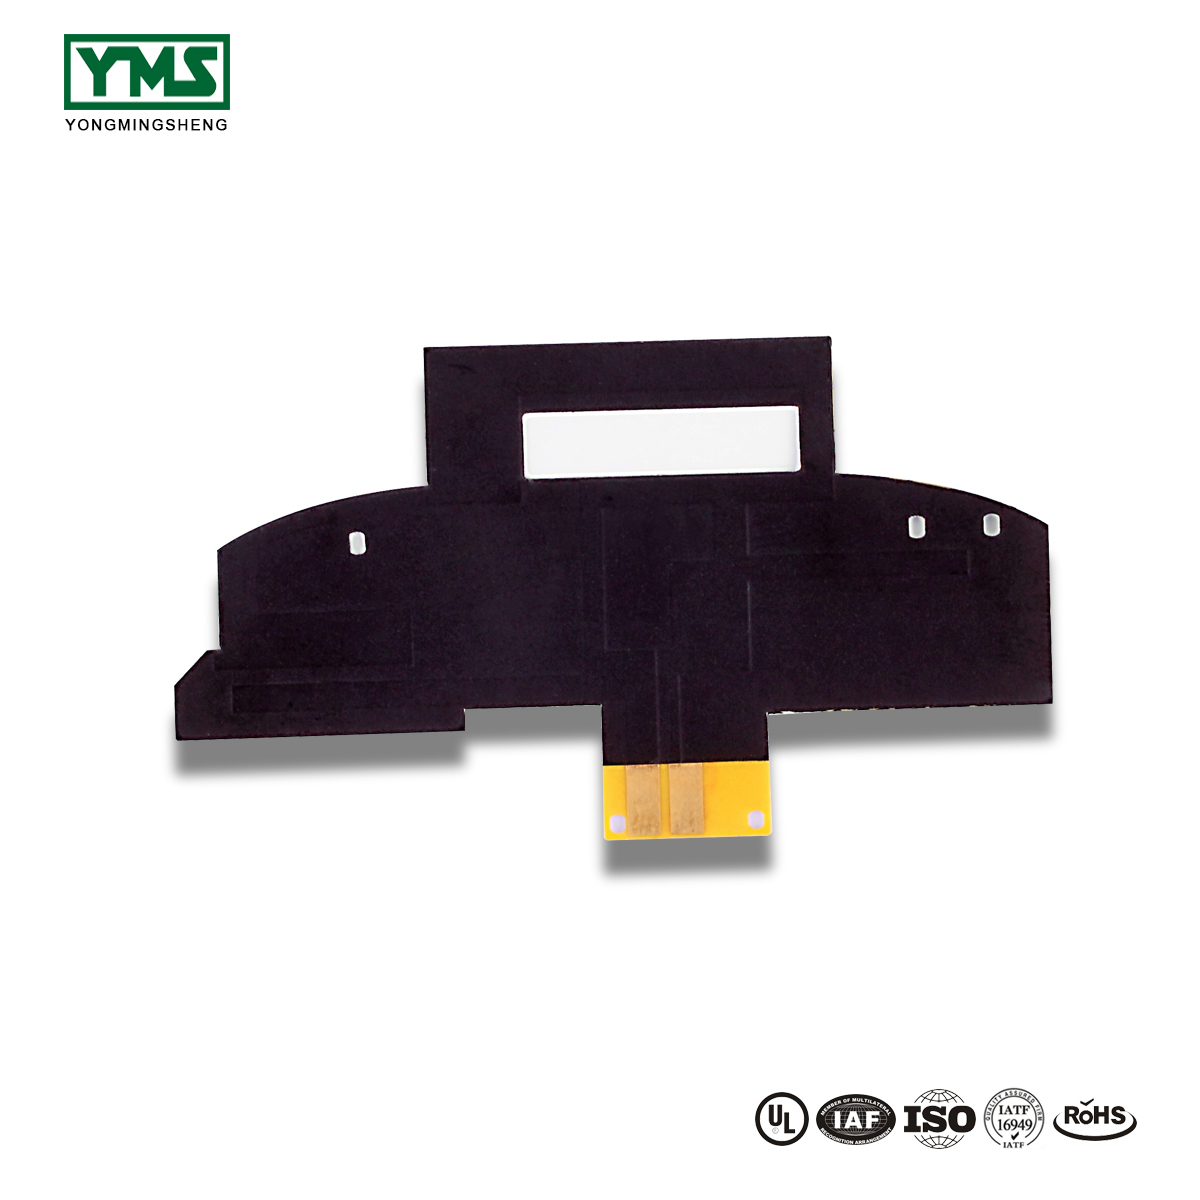 Best quality Mutilayer Pcb - 1layer  Cem-3 Stiffener flexible board | YMSPCB – Yongmingsheng